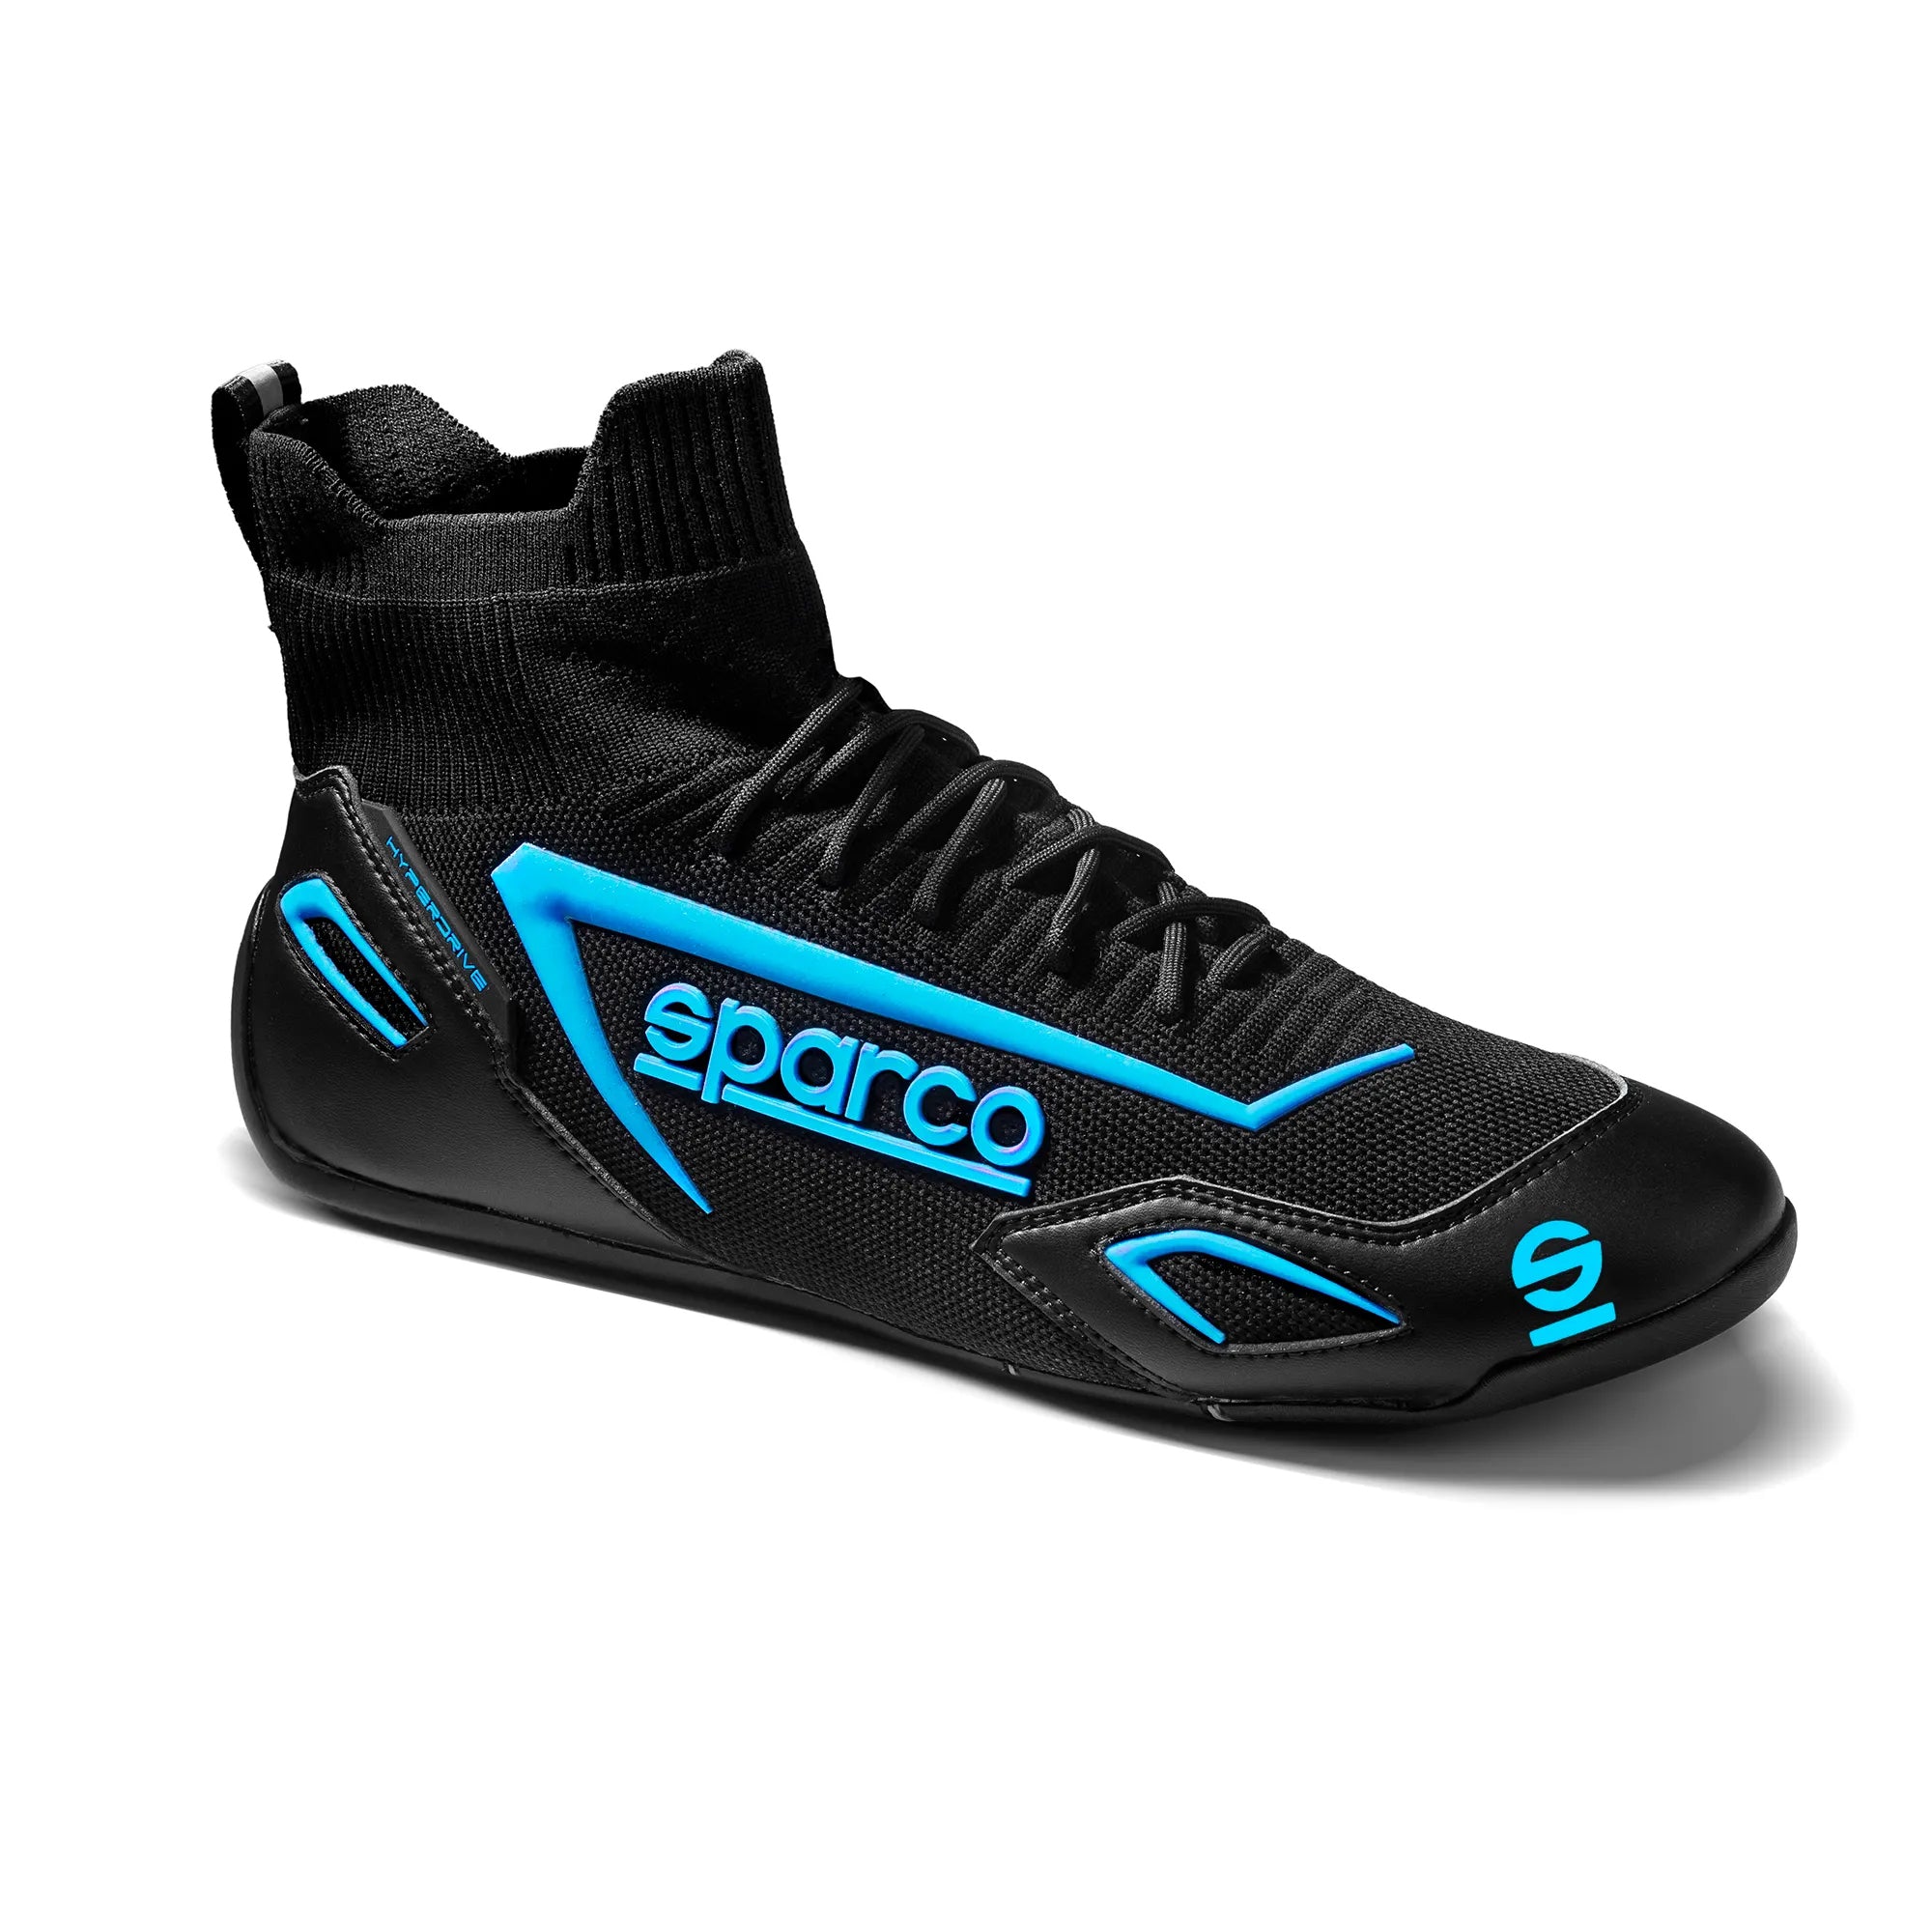 SPARCO 00129346NRAZ Gaming sim racing shoes HYPERDRIVE, black/blue, size 46 Photo-1 